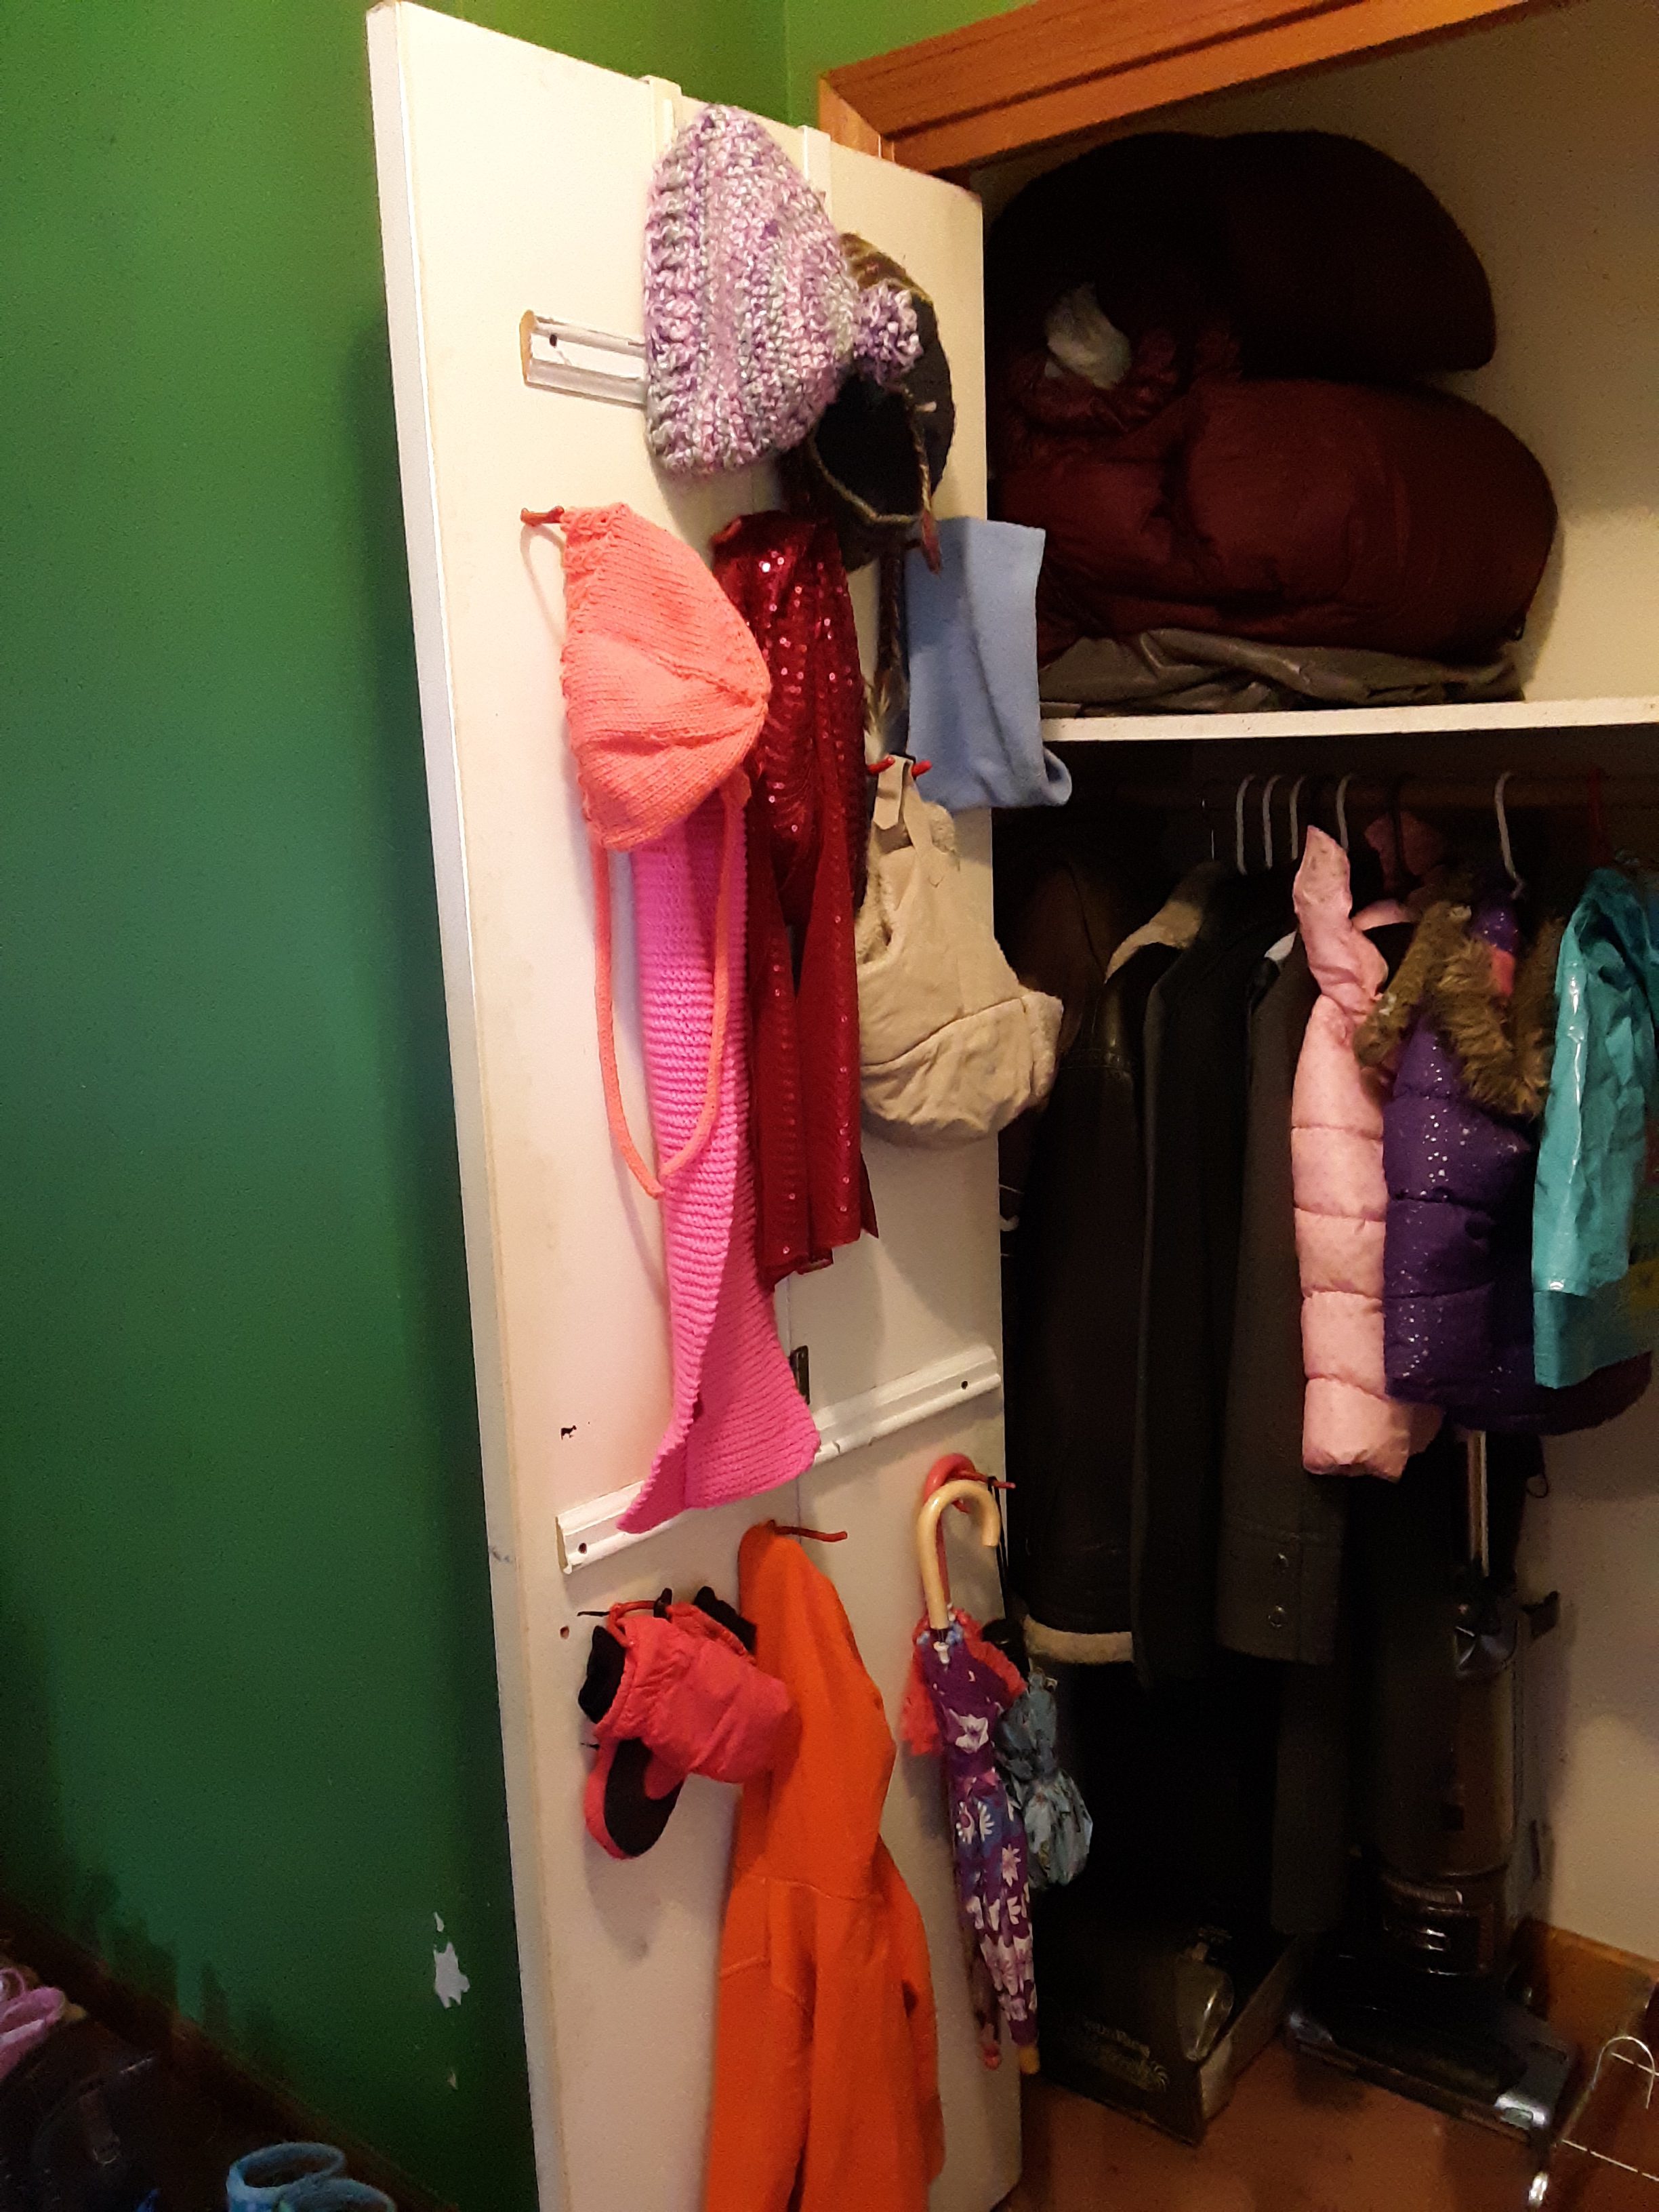 We hung hooks to organize hats, scarves, mittens, and umbrellas